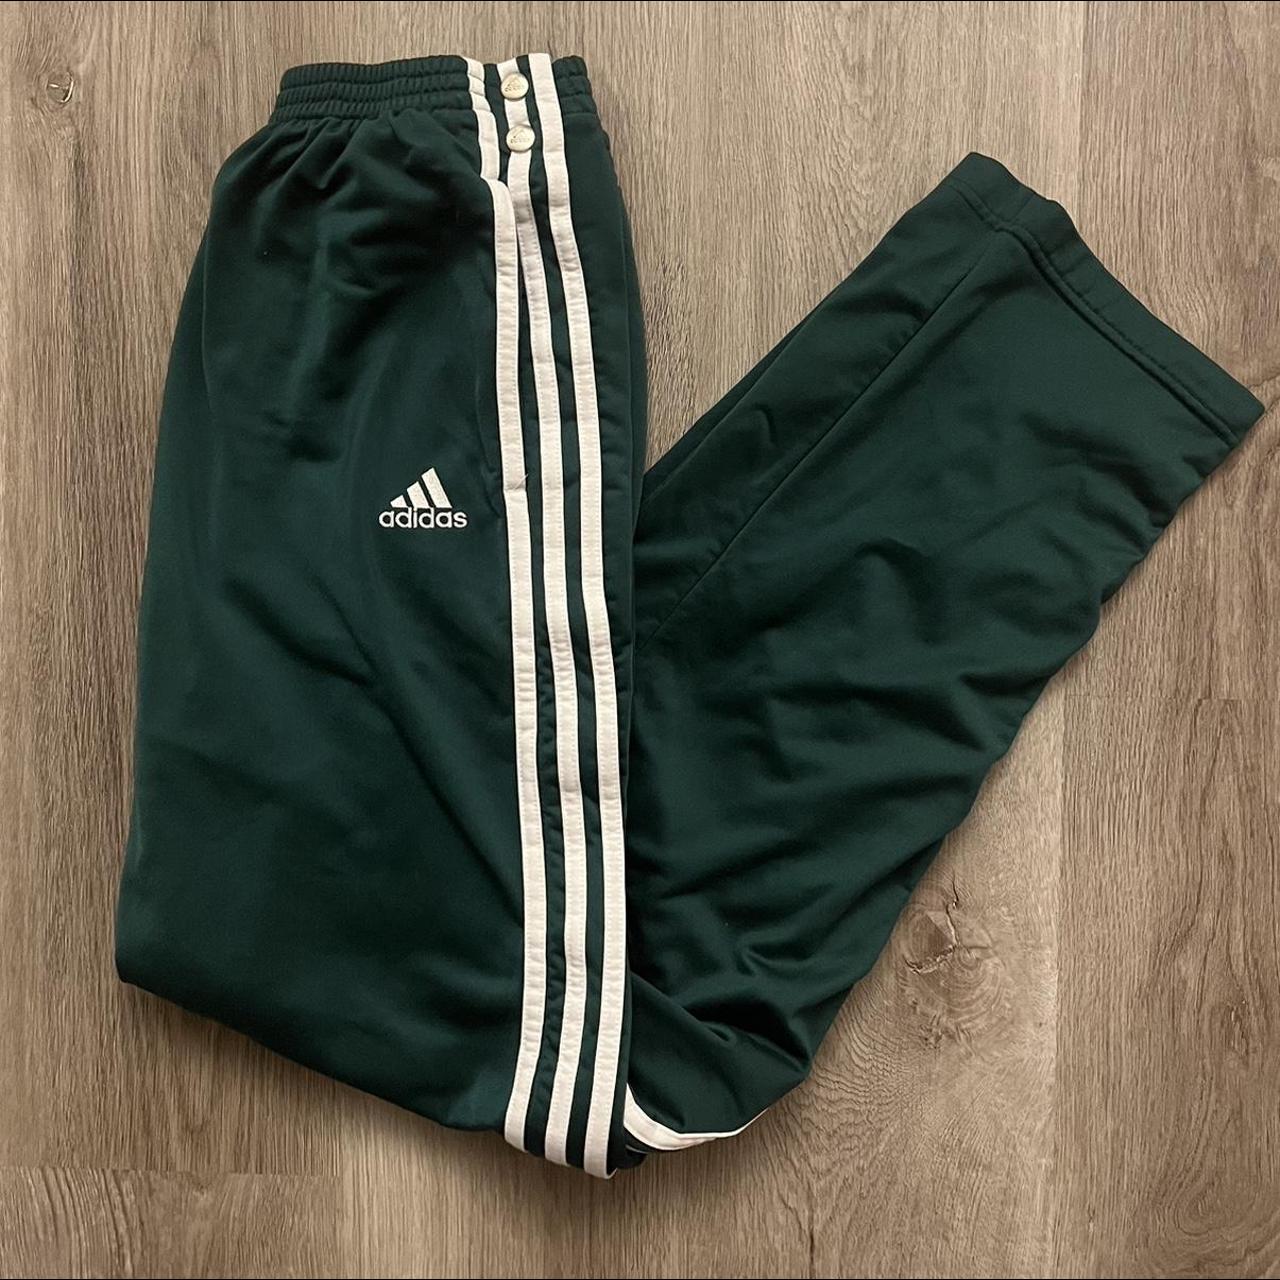 Adidas Men's Green and White Trousers | Depop